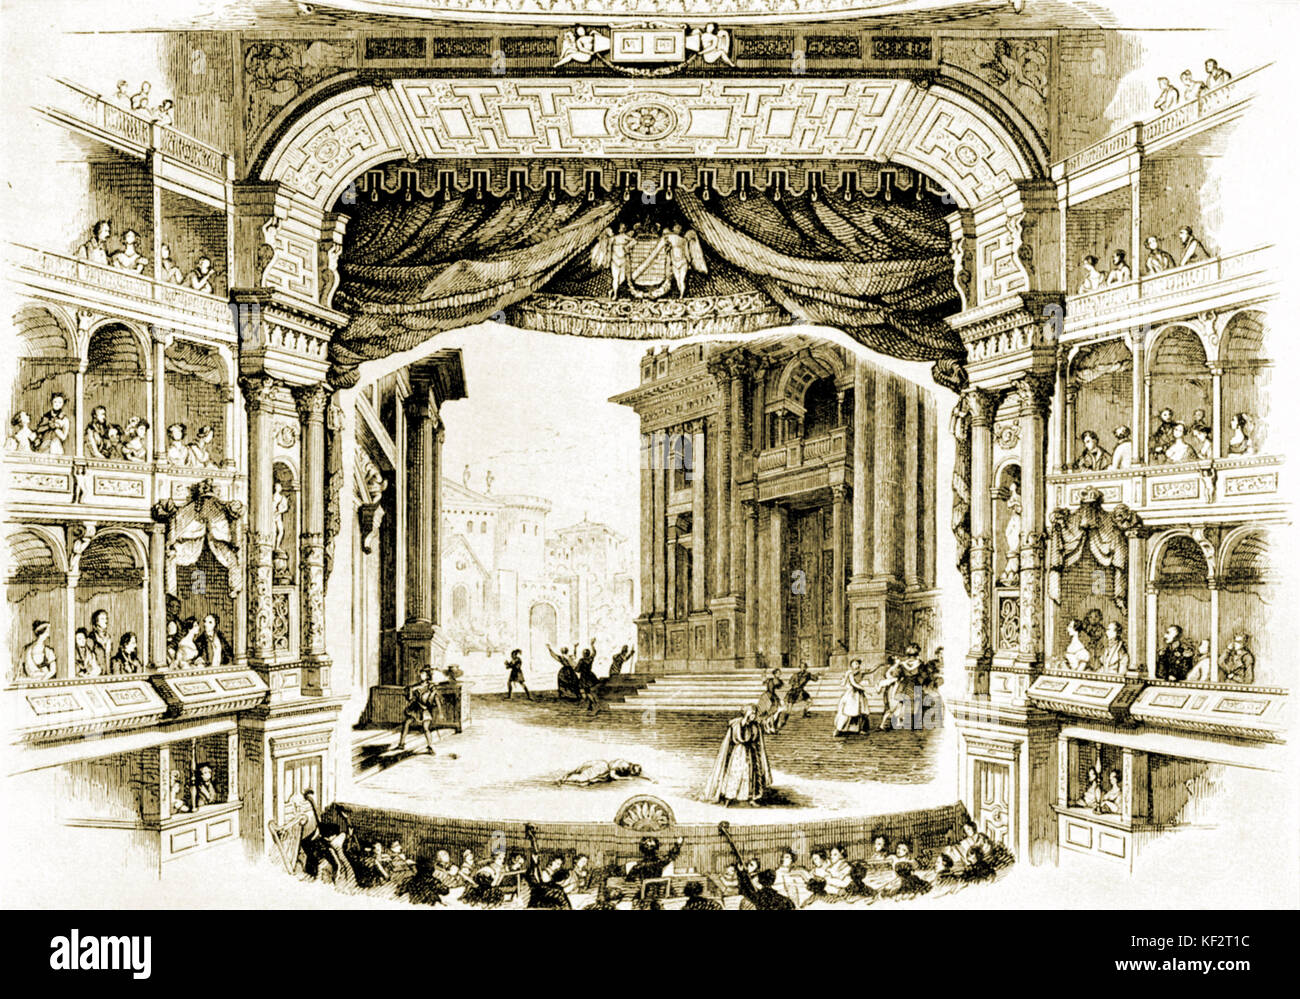 Performance of Richard Wagner 's opera  Rienzi.  Scene from première at Dresden Hoftheater on 20th October 1842.  Act IV, last scene.  From an engraving made in 1843. Stock Photo